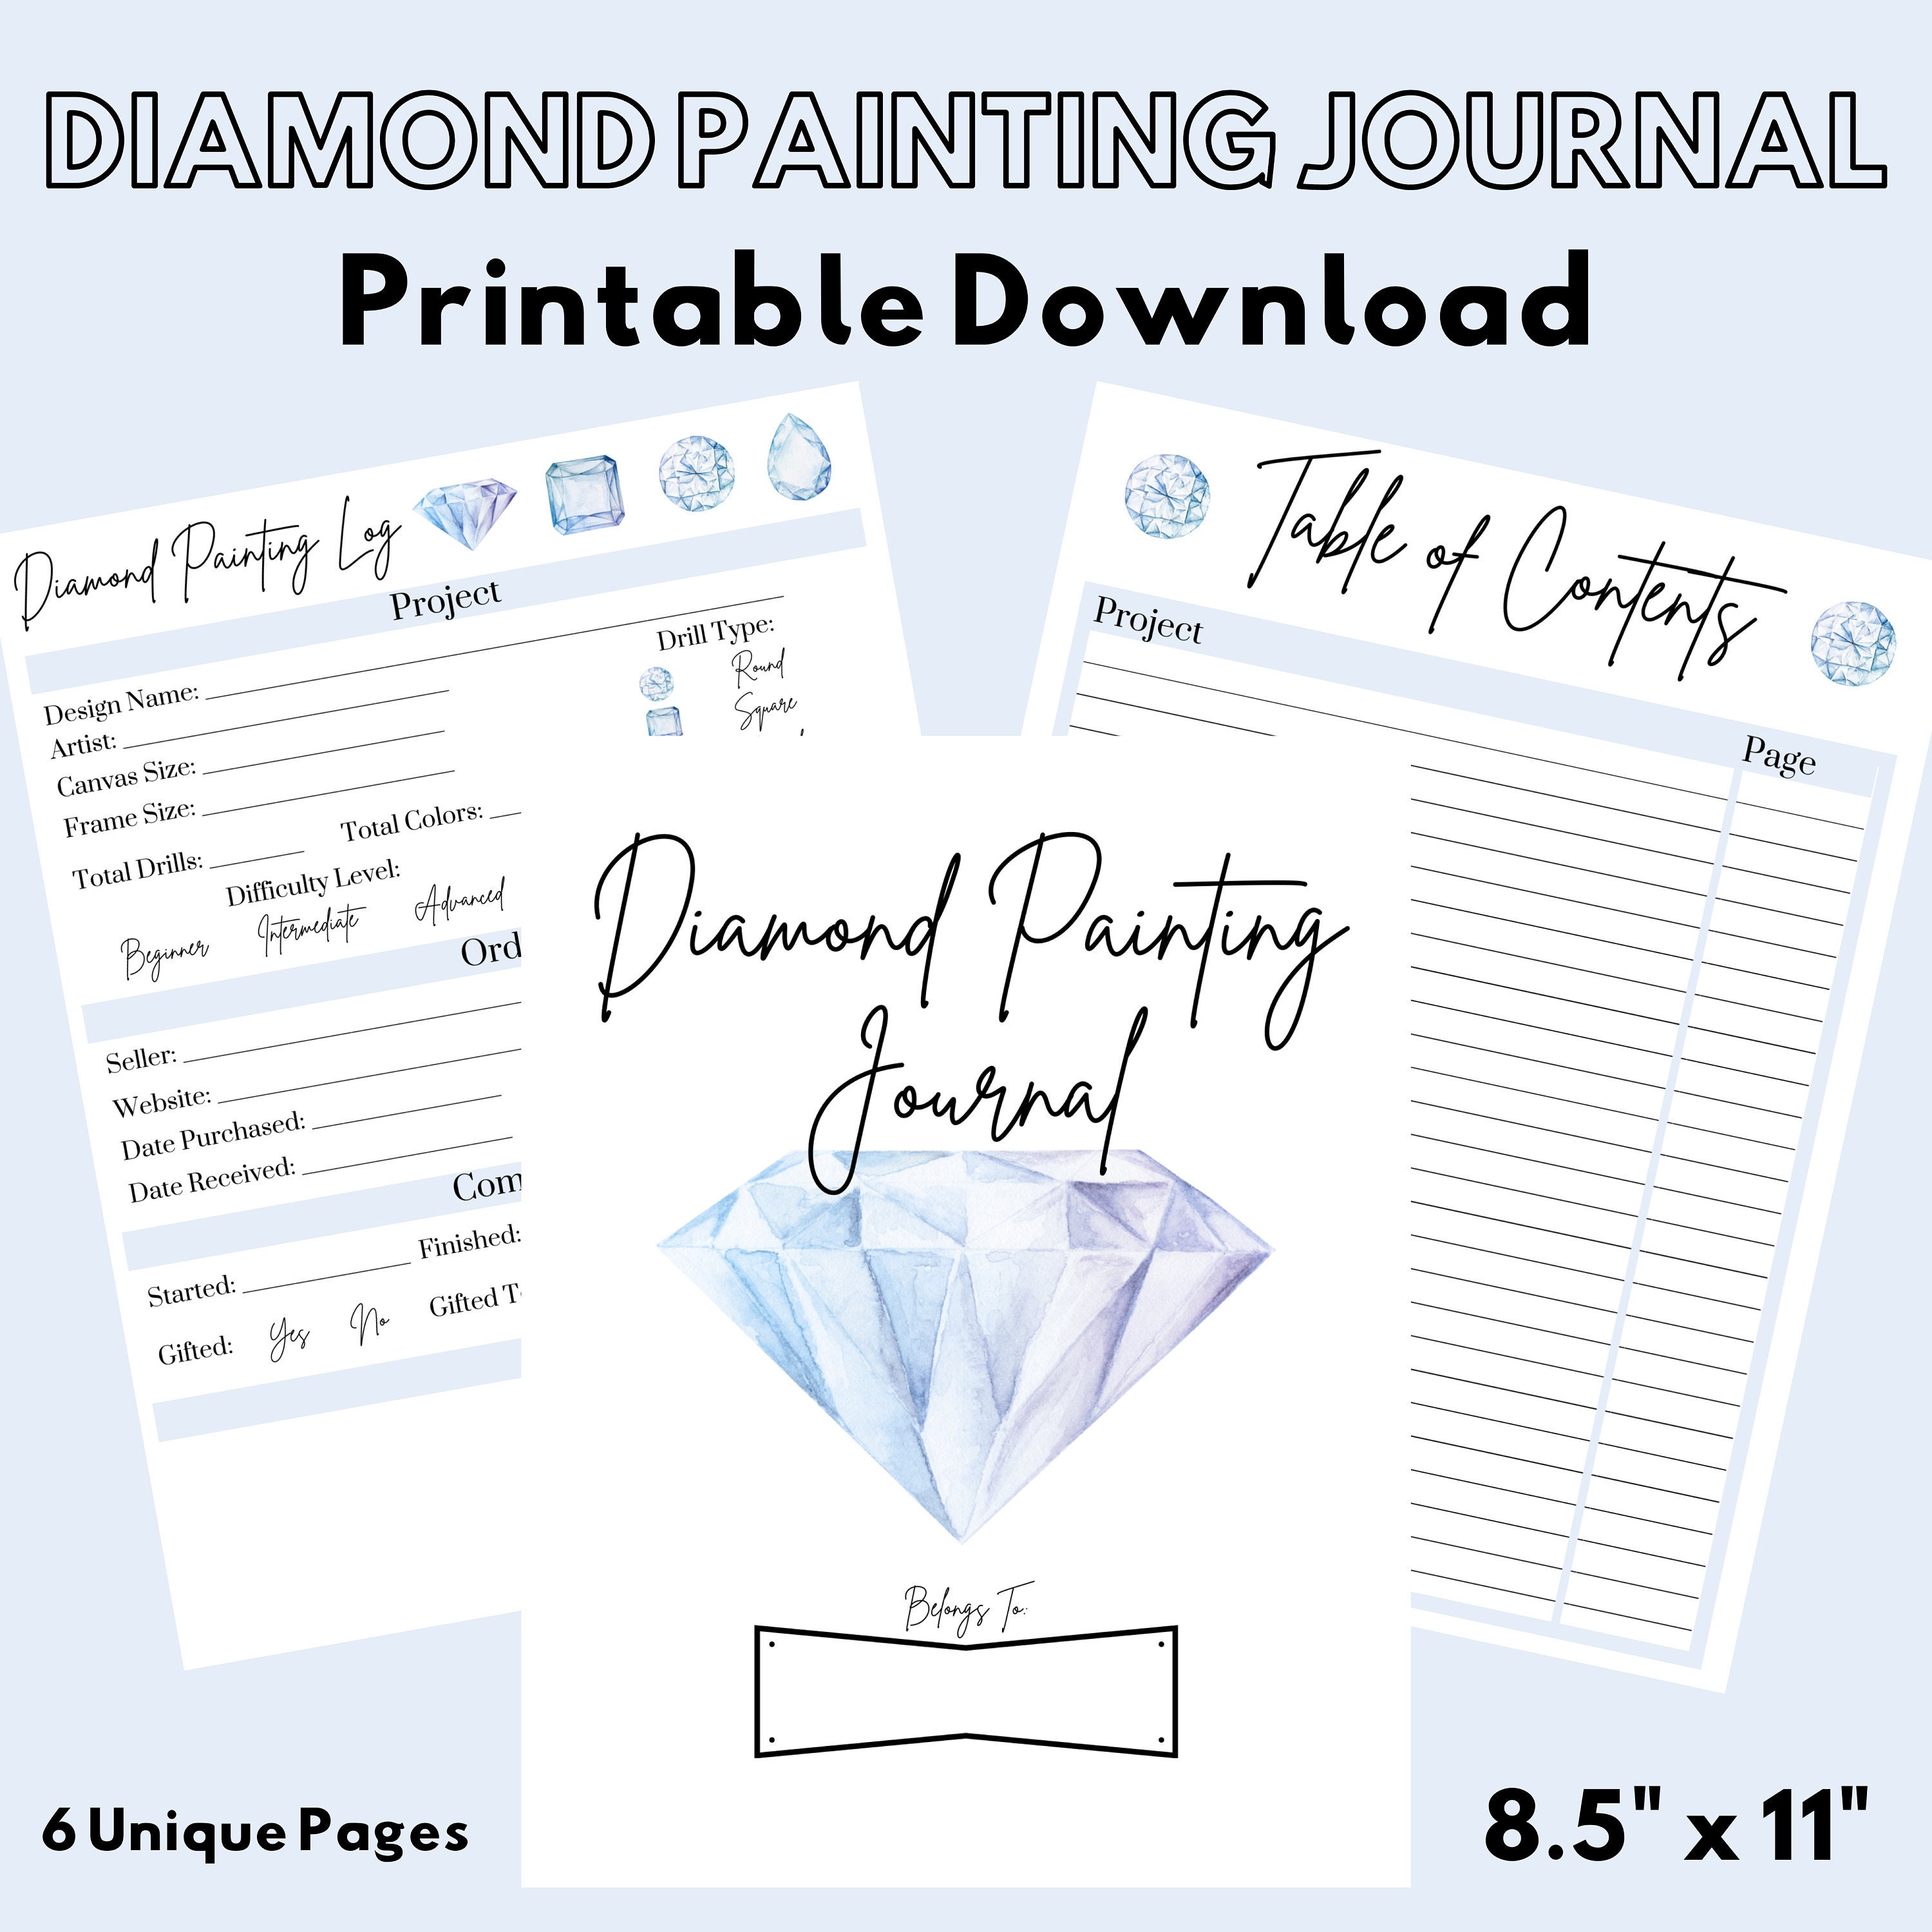 PDF] Diamond Painting Log Book: An Essential DMC Color Chart Theme Cute  Efficient Inventory Log, Organizer Notebook to Track DP Art Projects ( Journal for Diamond Painting Art Enthusiasts) Ipad